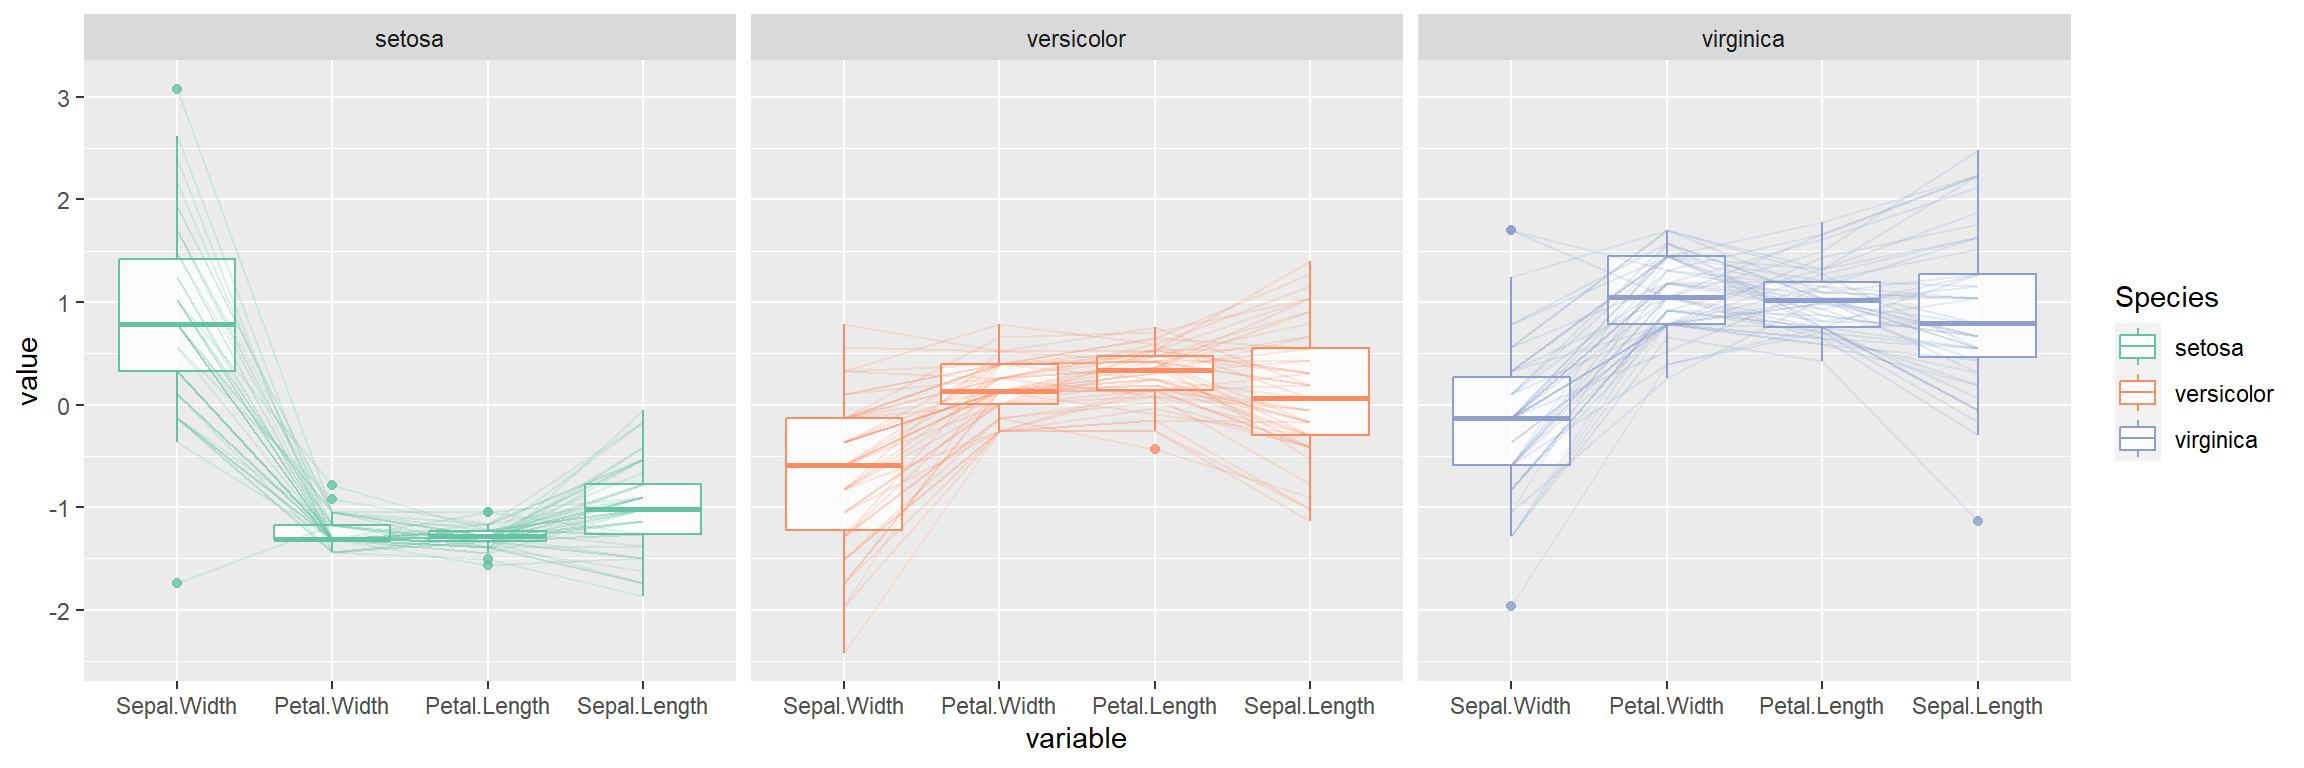 Parallel coordinates by group in ggplot2